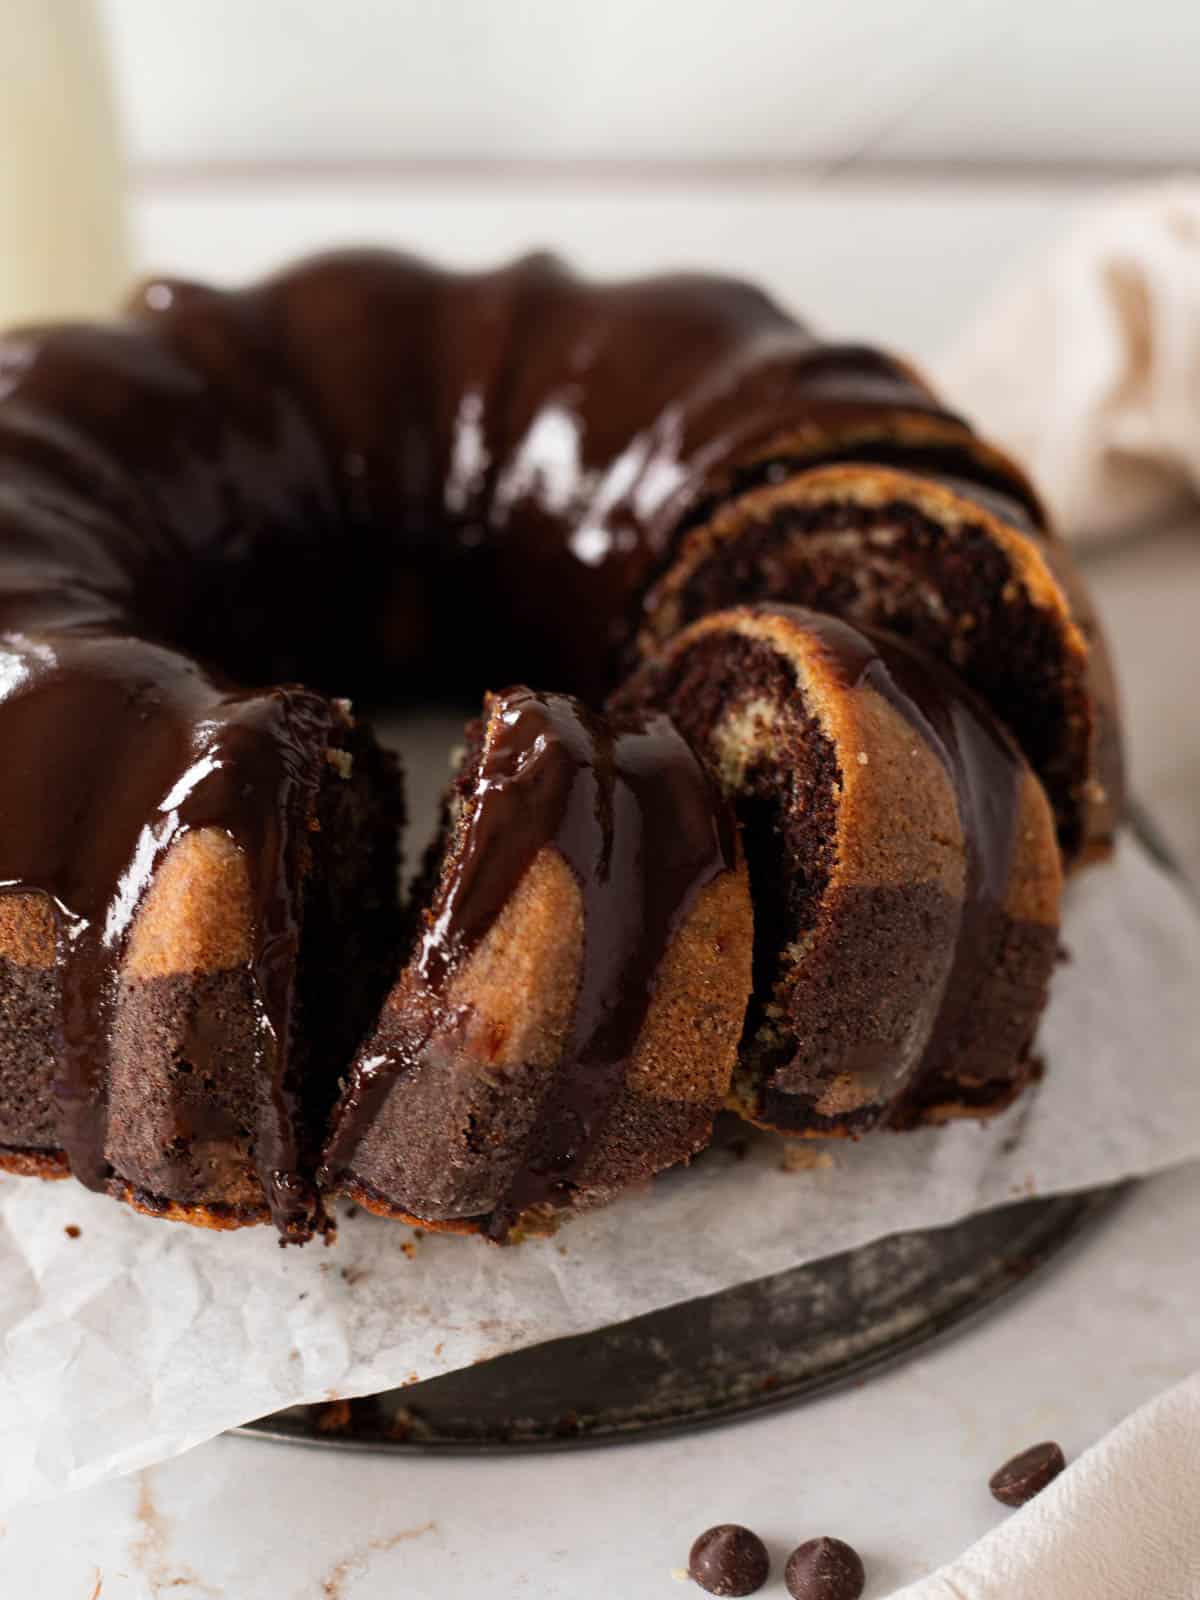 buttermilk marble bundt cake with chocolate ganache with 3 slices cut into it.